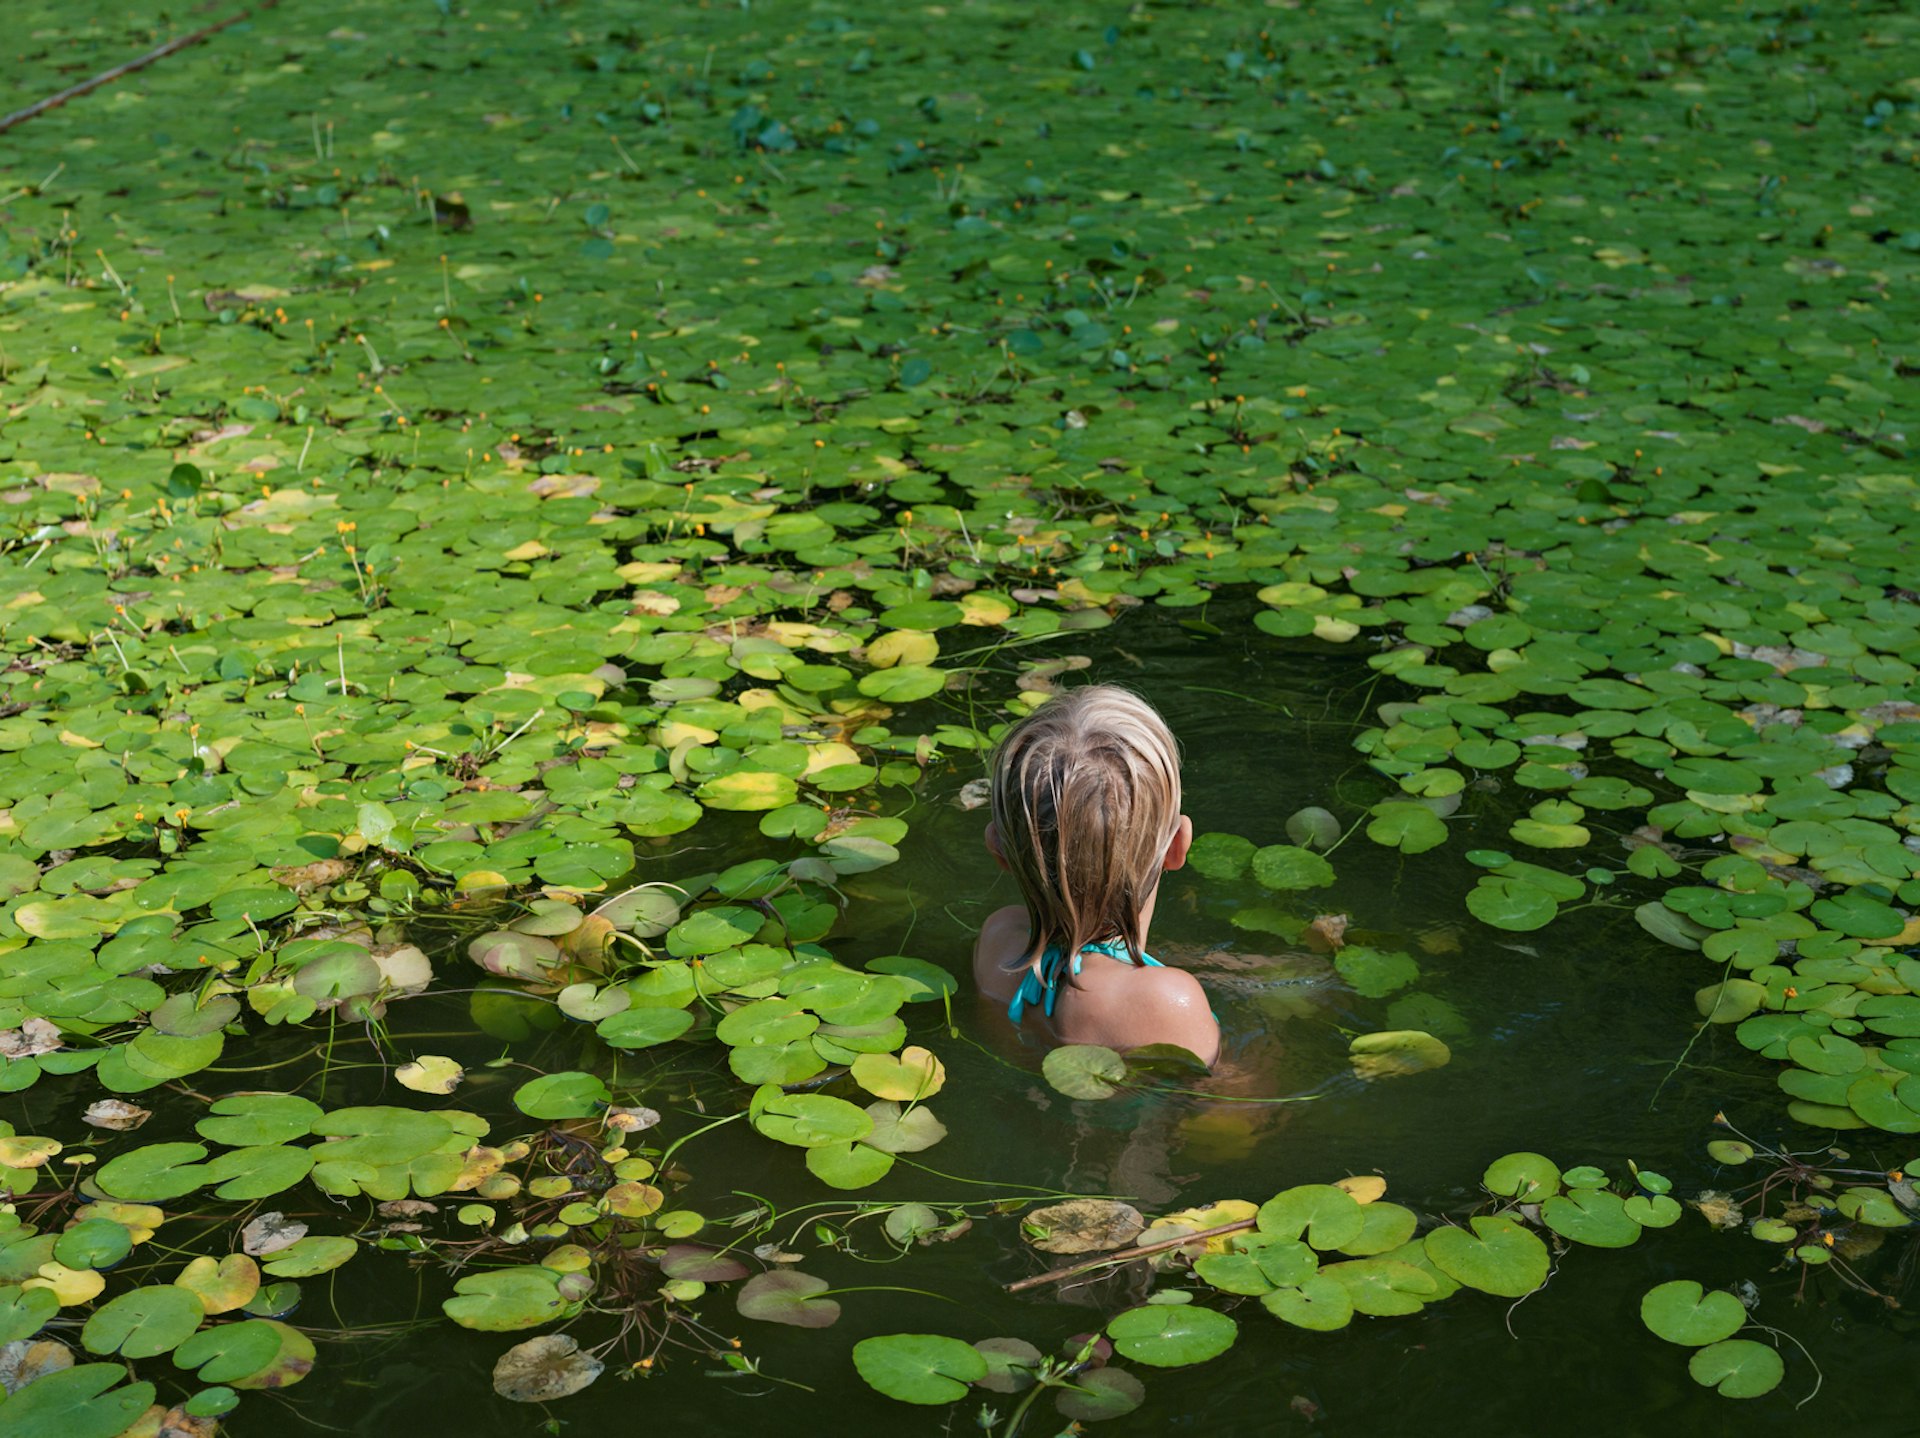 Maddie with invasive water lilies, North Carolina. © Lucas Foglia, courtesy of Michael Hoppen Gallery, London.